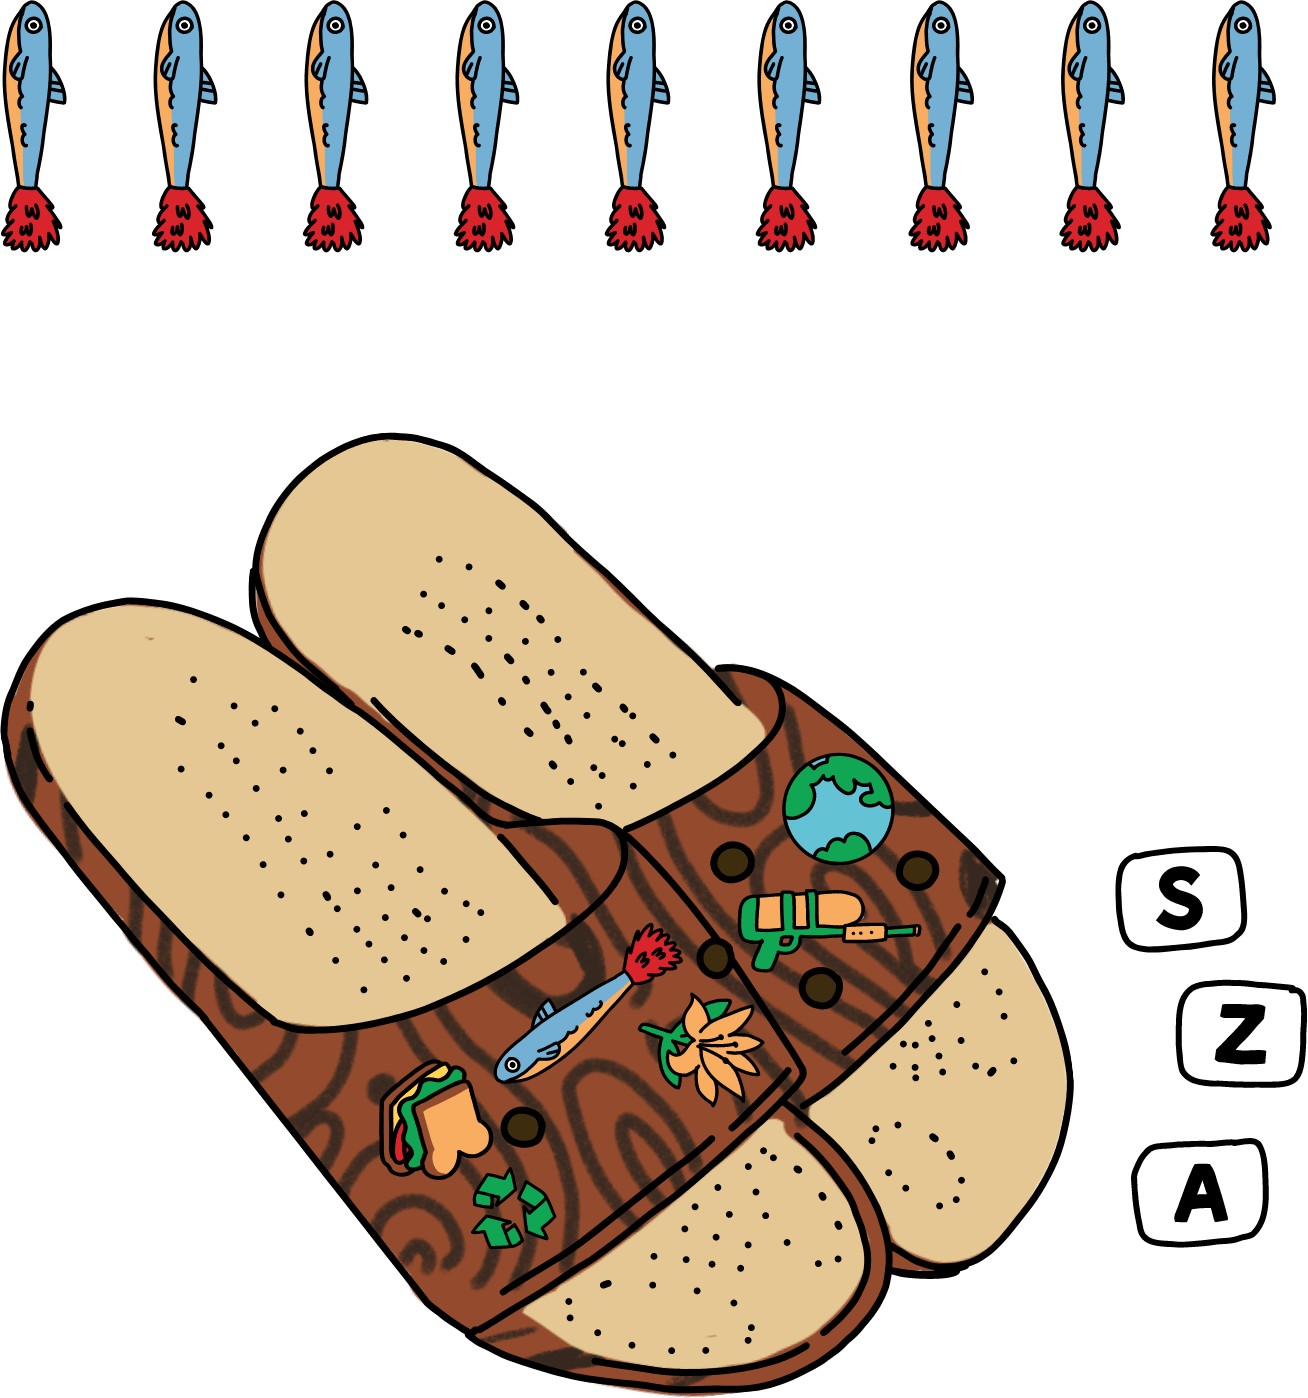 Illustration of Wood Print Slides with Assorted Jibbitz. Lettered tiles organized to read SZA vertically